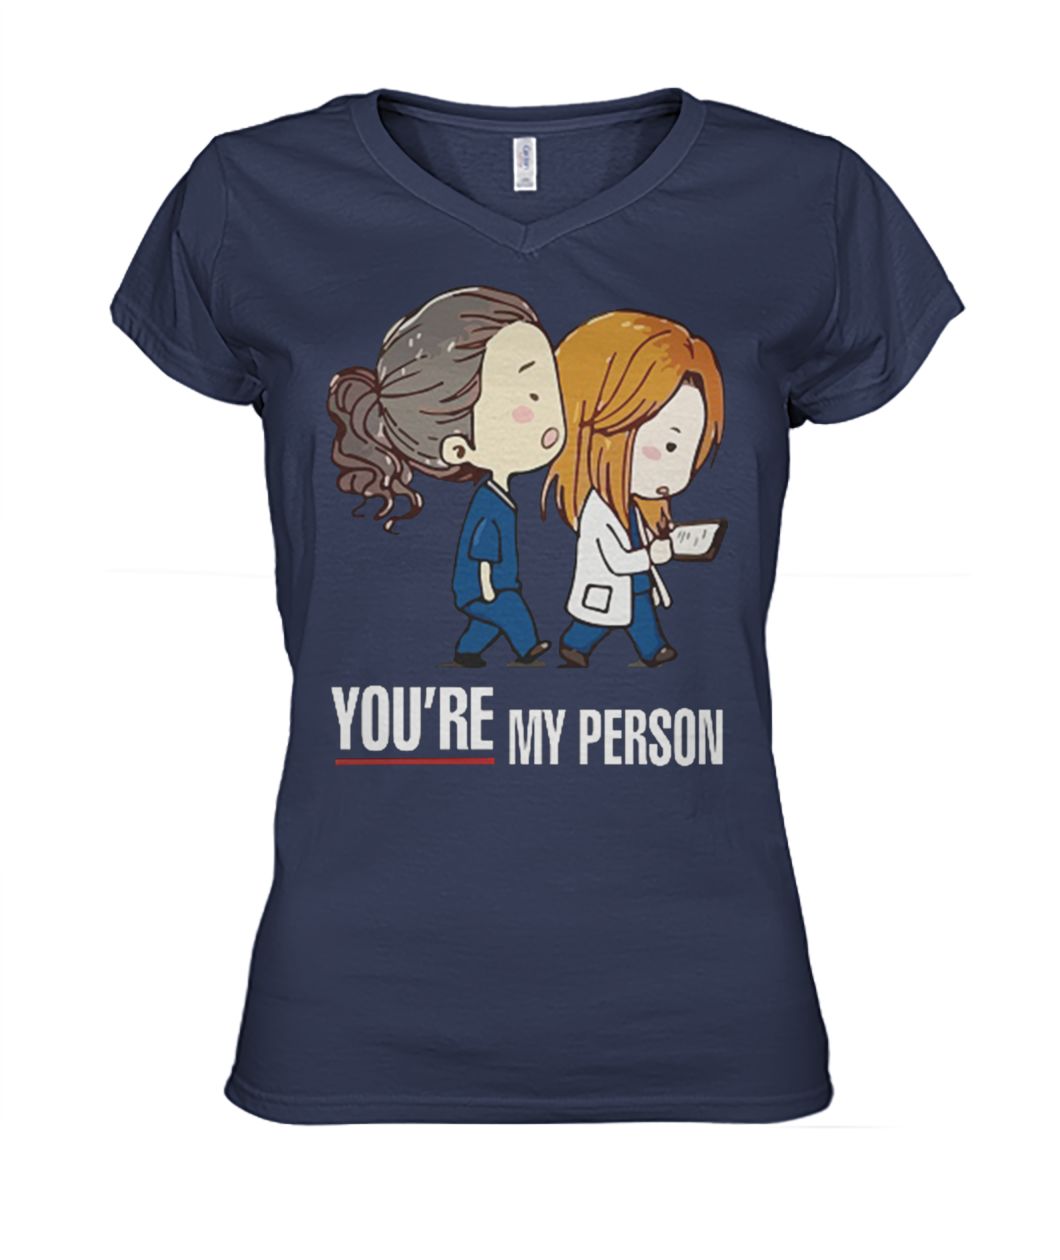 Grey's anatomy you're my person women's v-neck